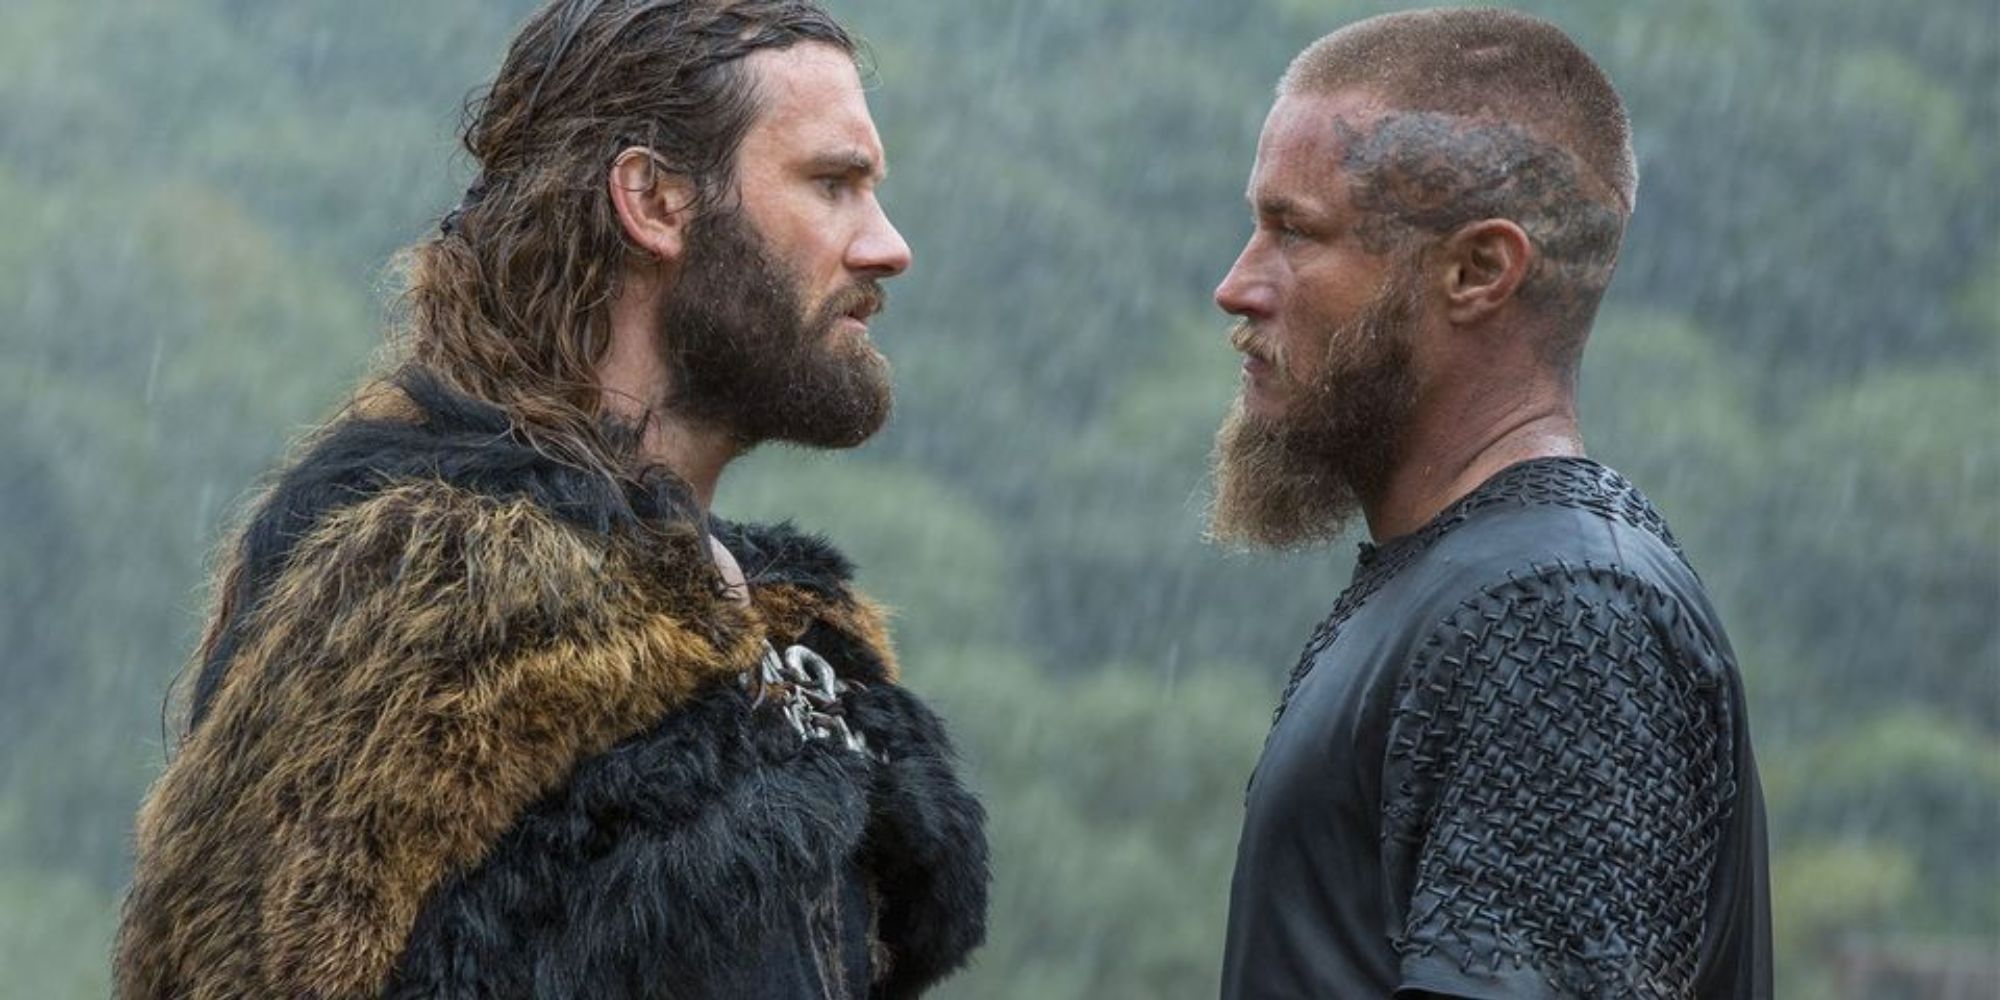 Vikings: Was Rollo the father of the real Bjorn Ironside?